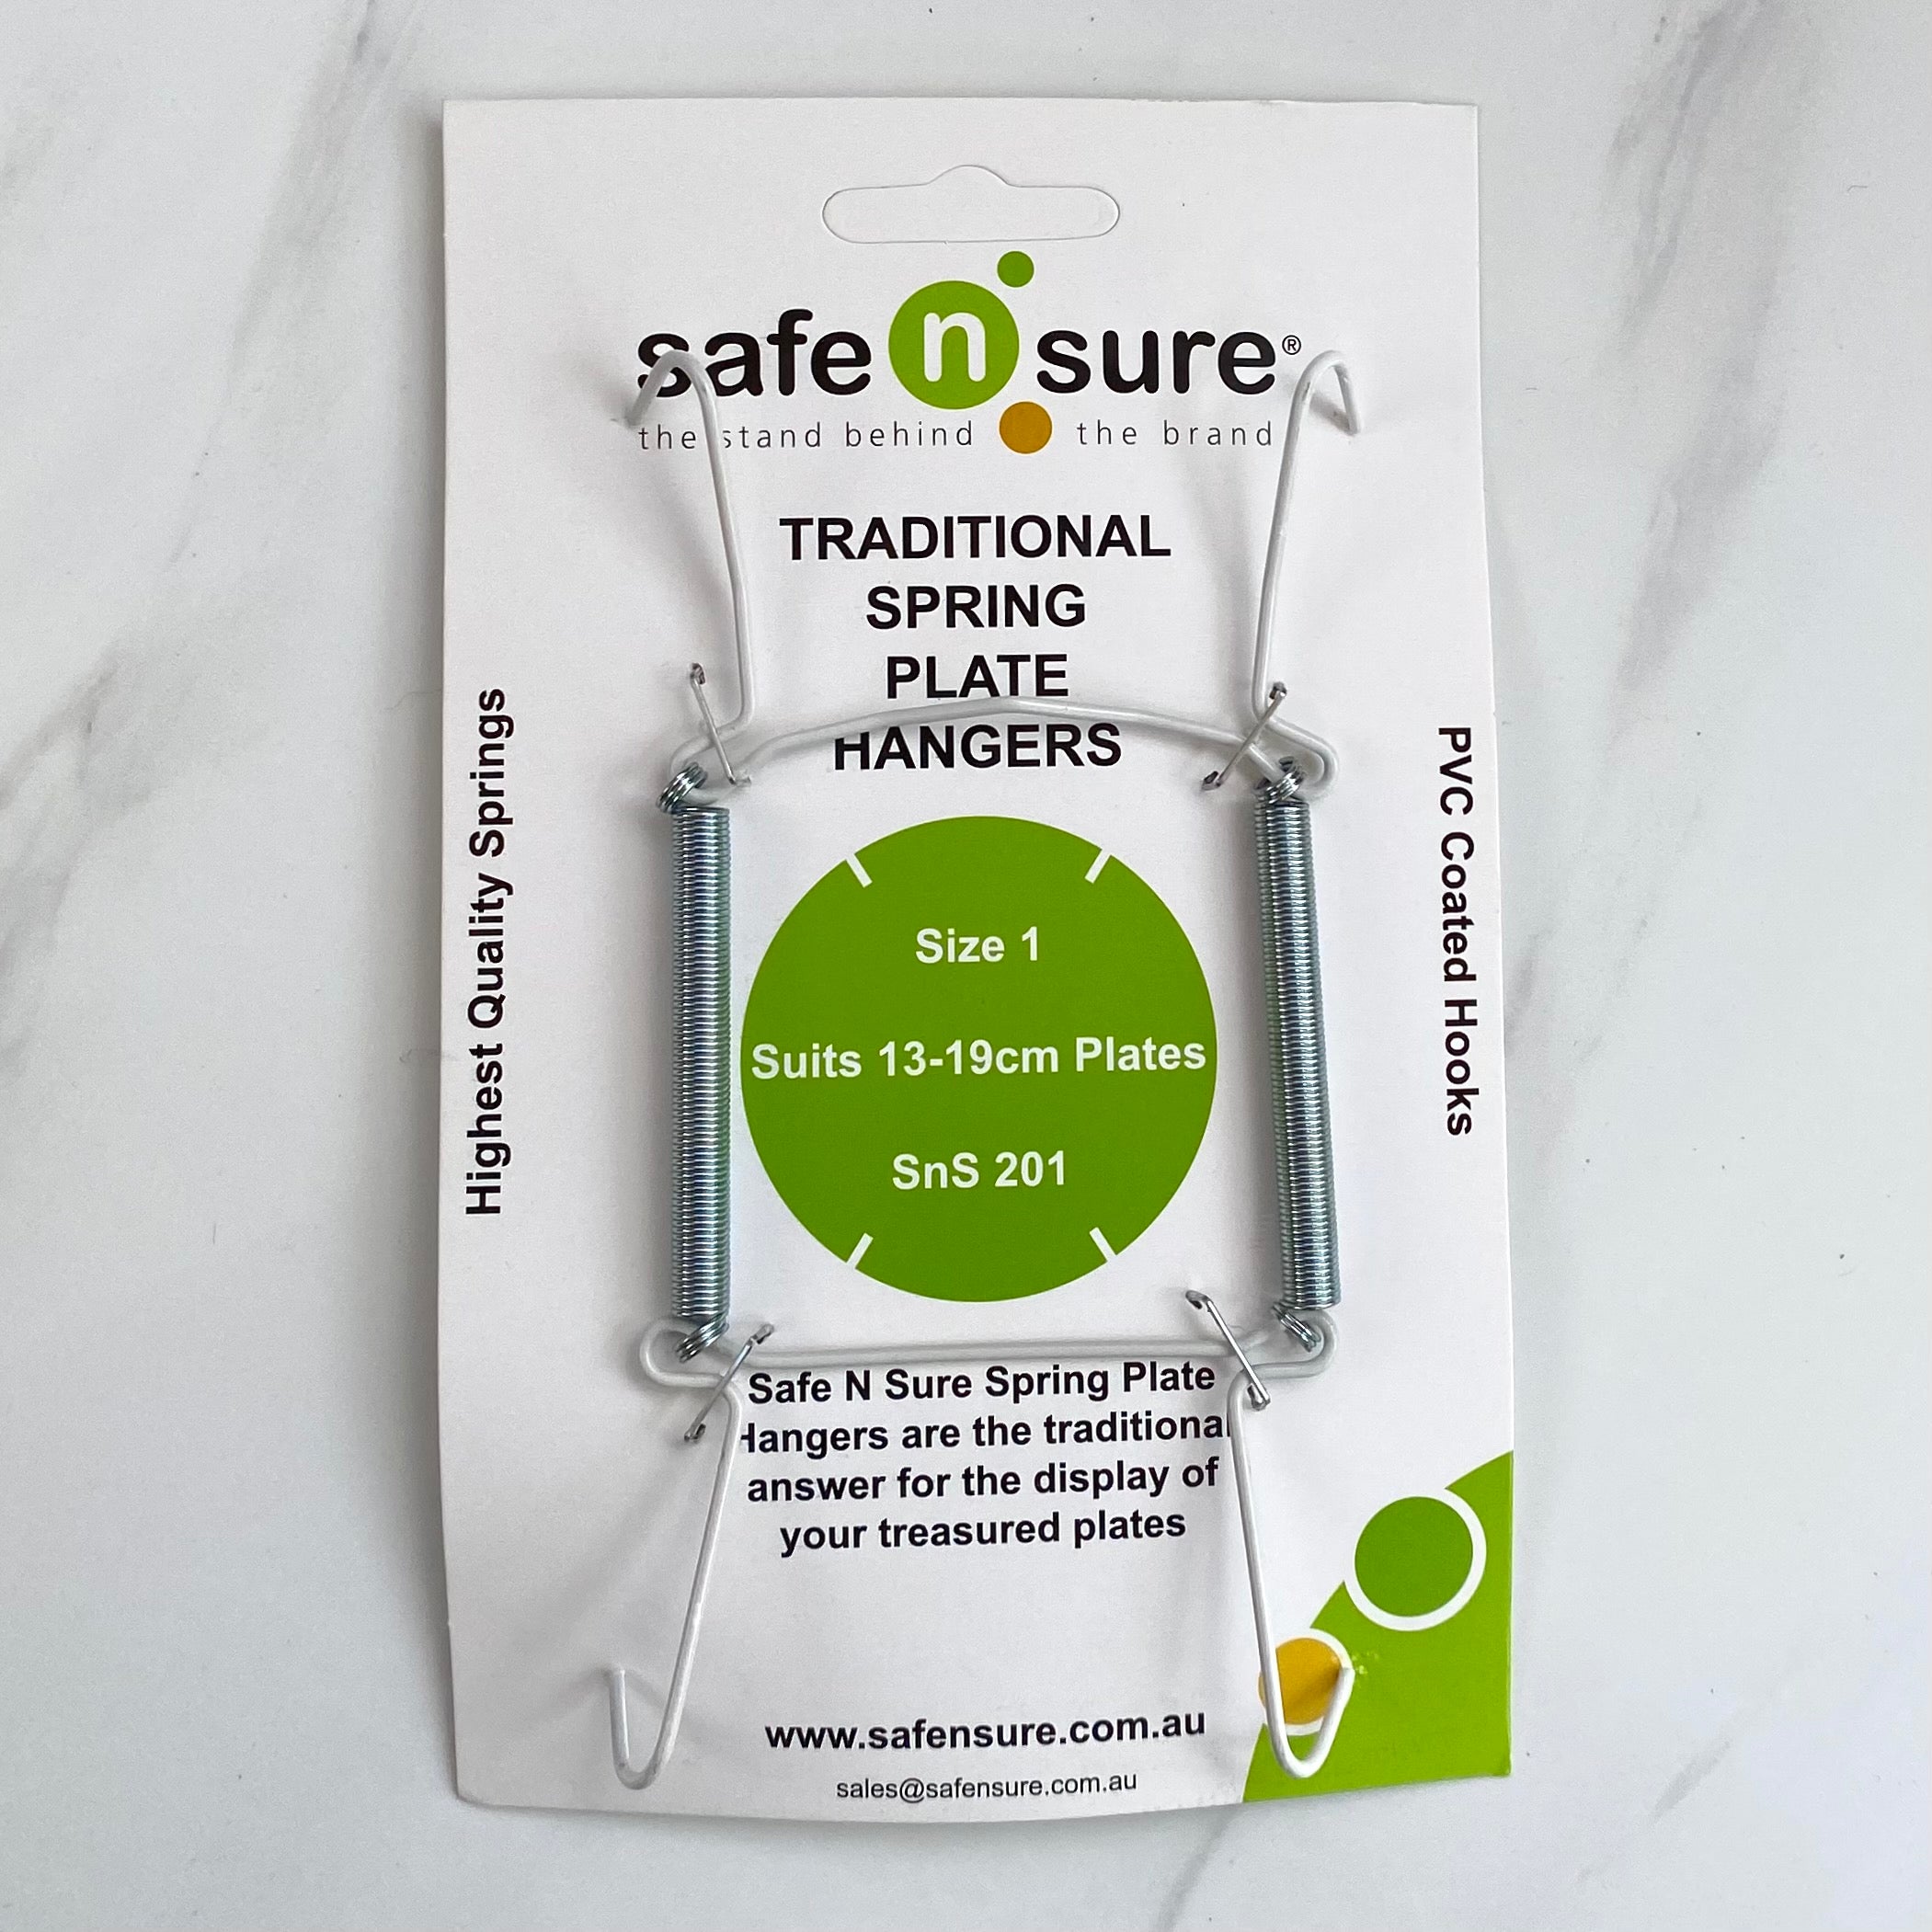 ‘Plant one on me’ quote on plate